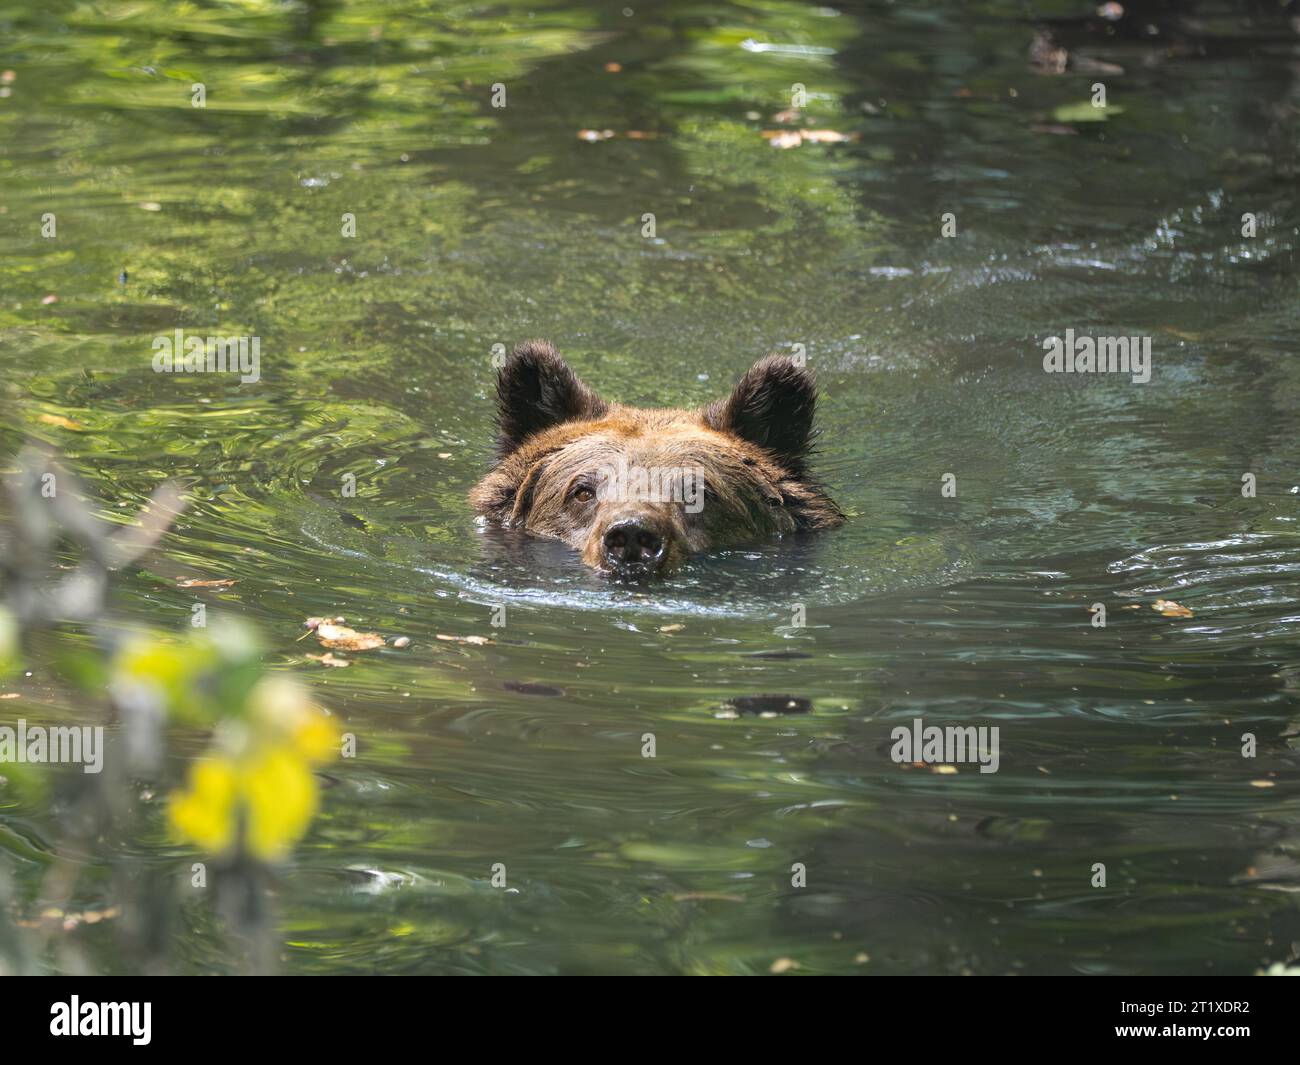 Swimming brown bear in a pond or lake. The female animal head is looking out of the water. The ursus arctos moves toward the camera. Stock Photo